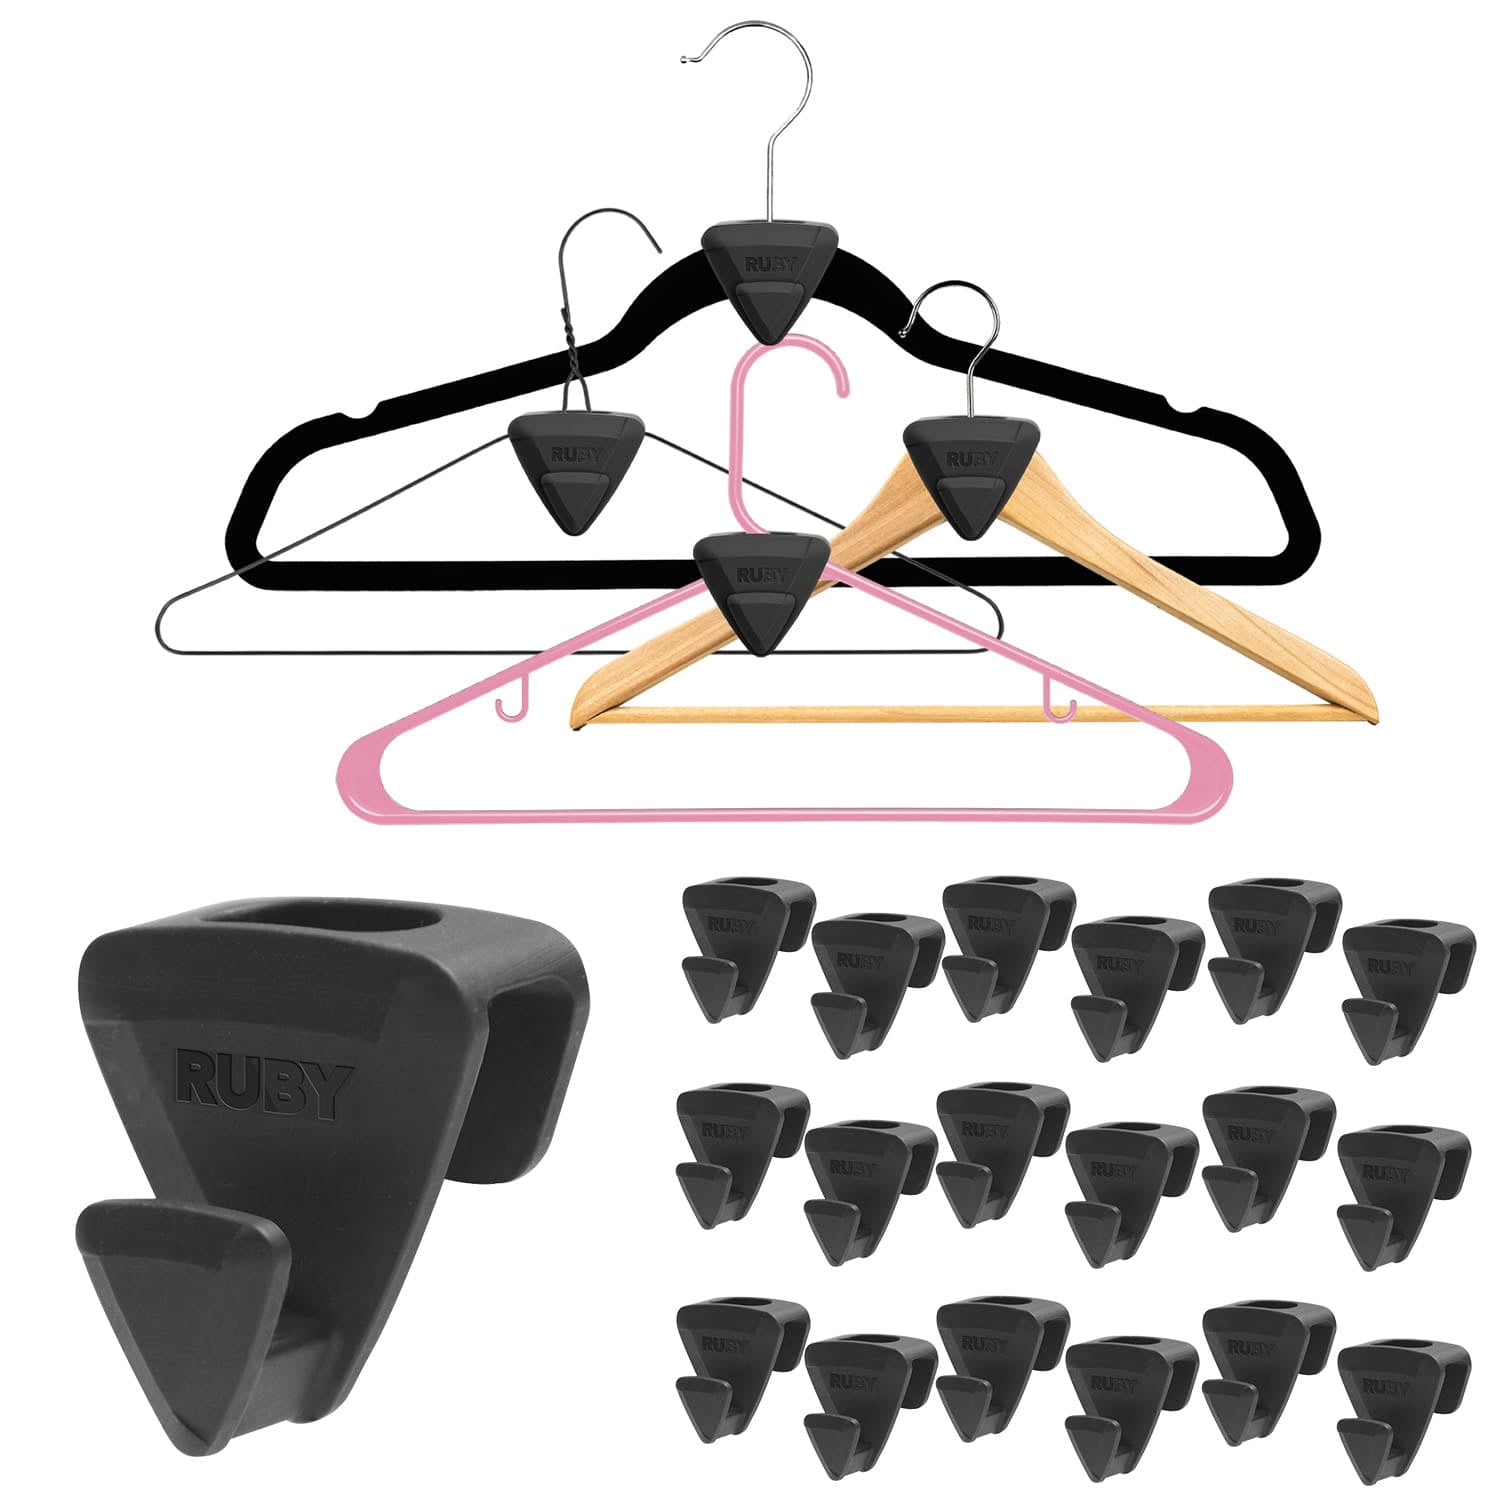 RUBY Space Triangles AS-SEEN-ON-TV, Creates Up to 3X More Closet Space, 8  Pack